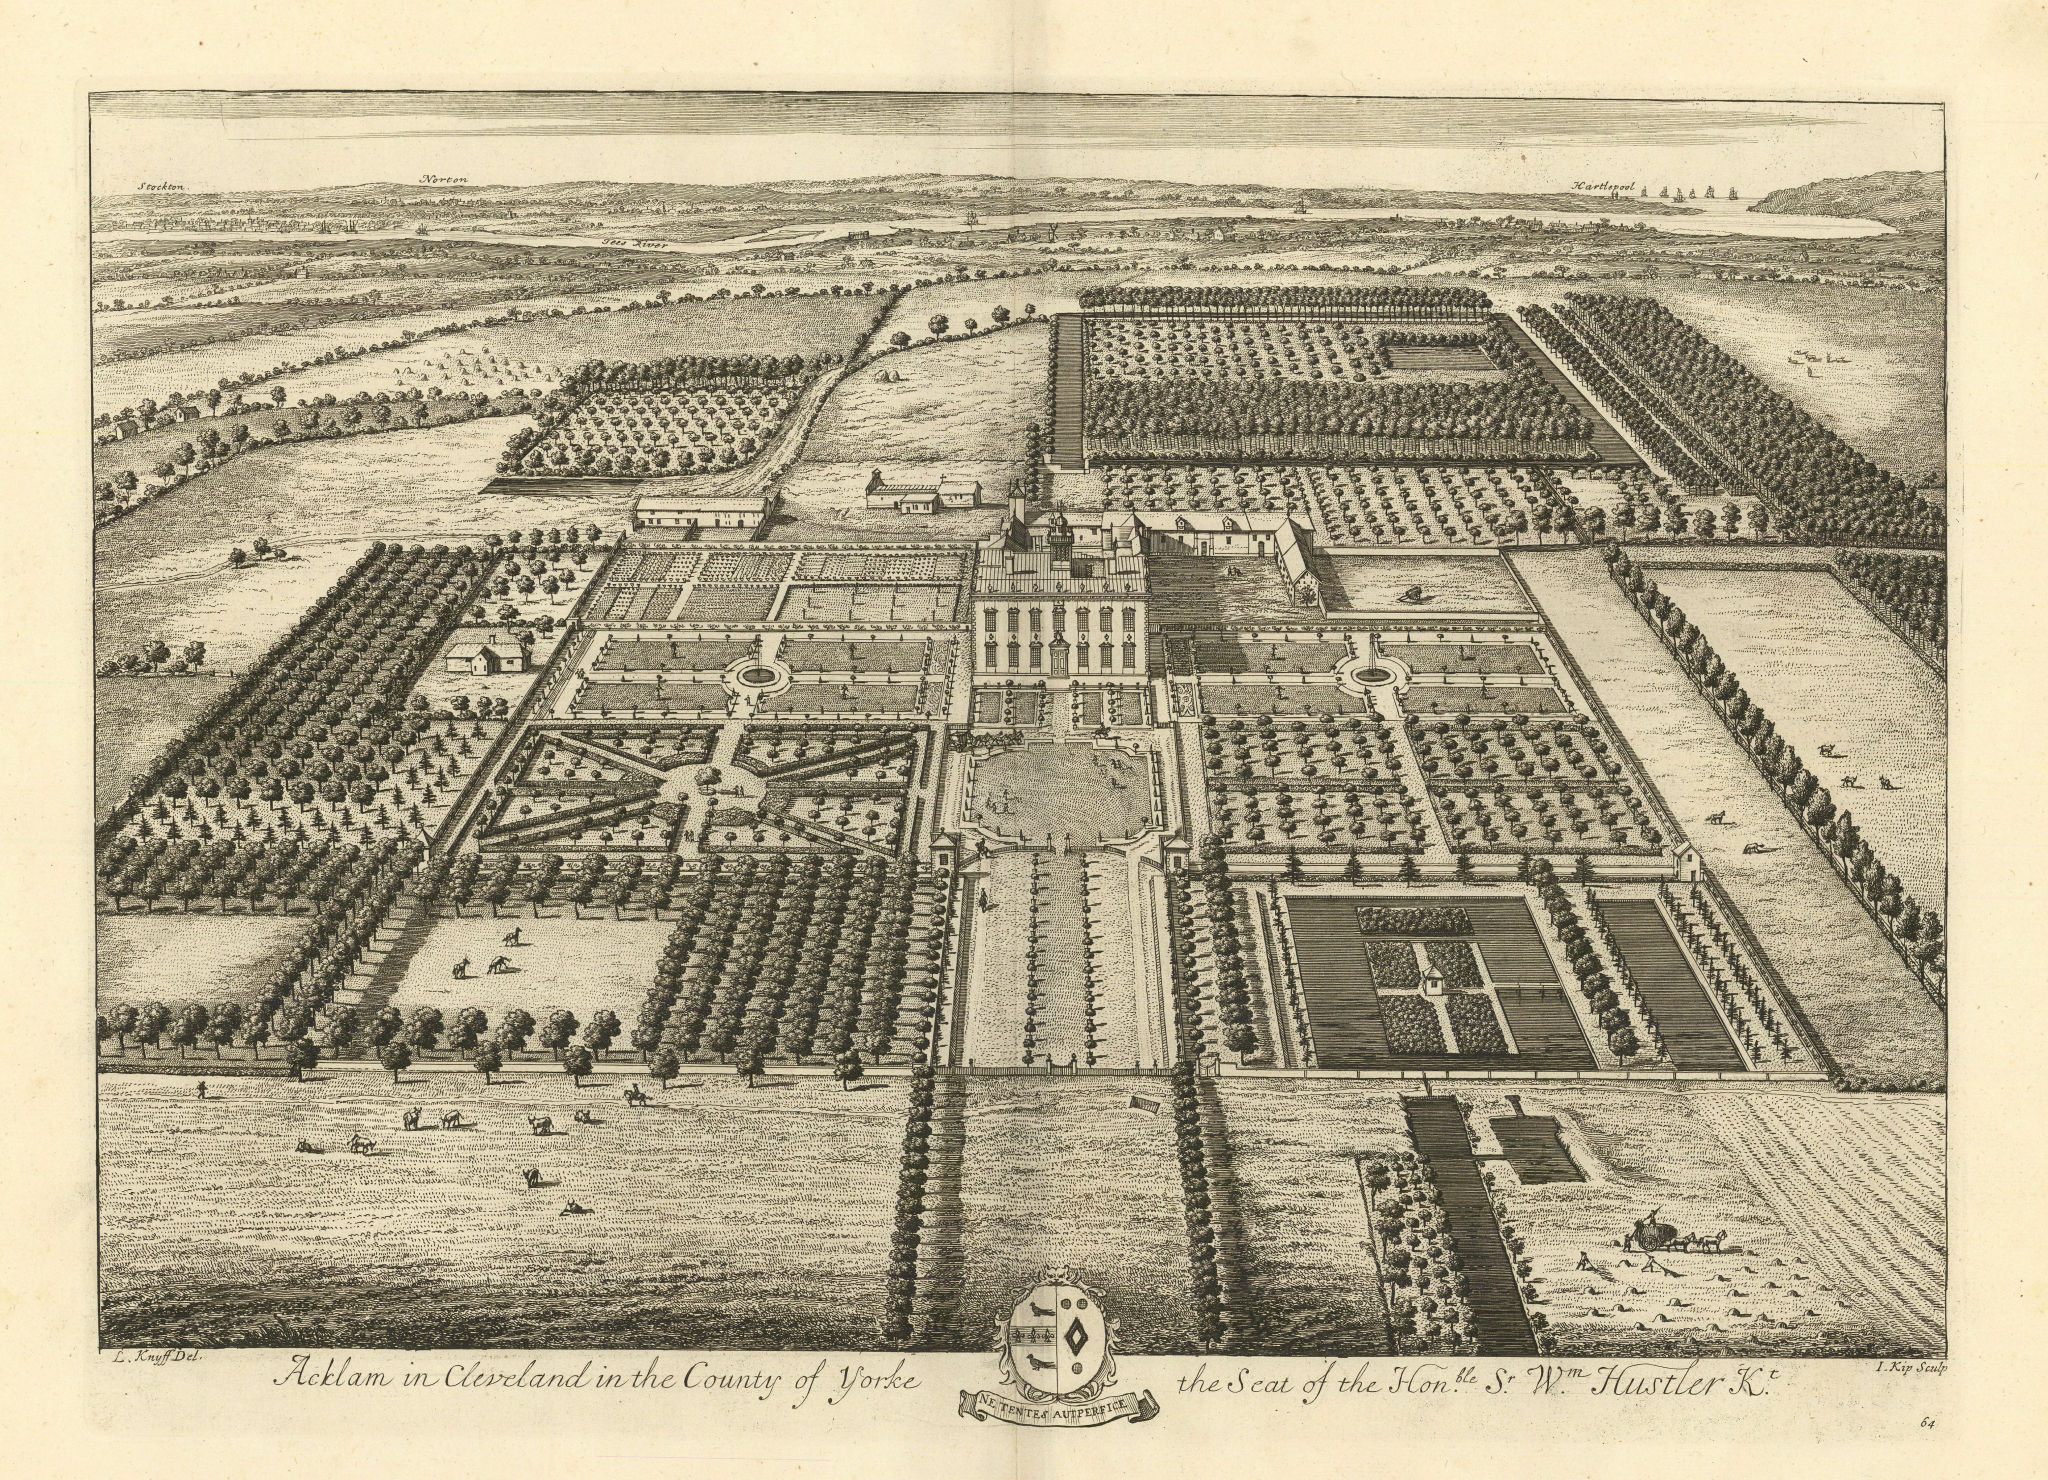 Associate Product Acklam Hall, Middlesbrough College by Kip & Knyff. "Acklam in Cleveland" 1709